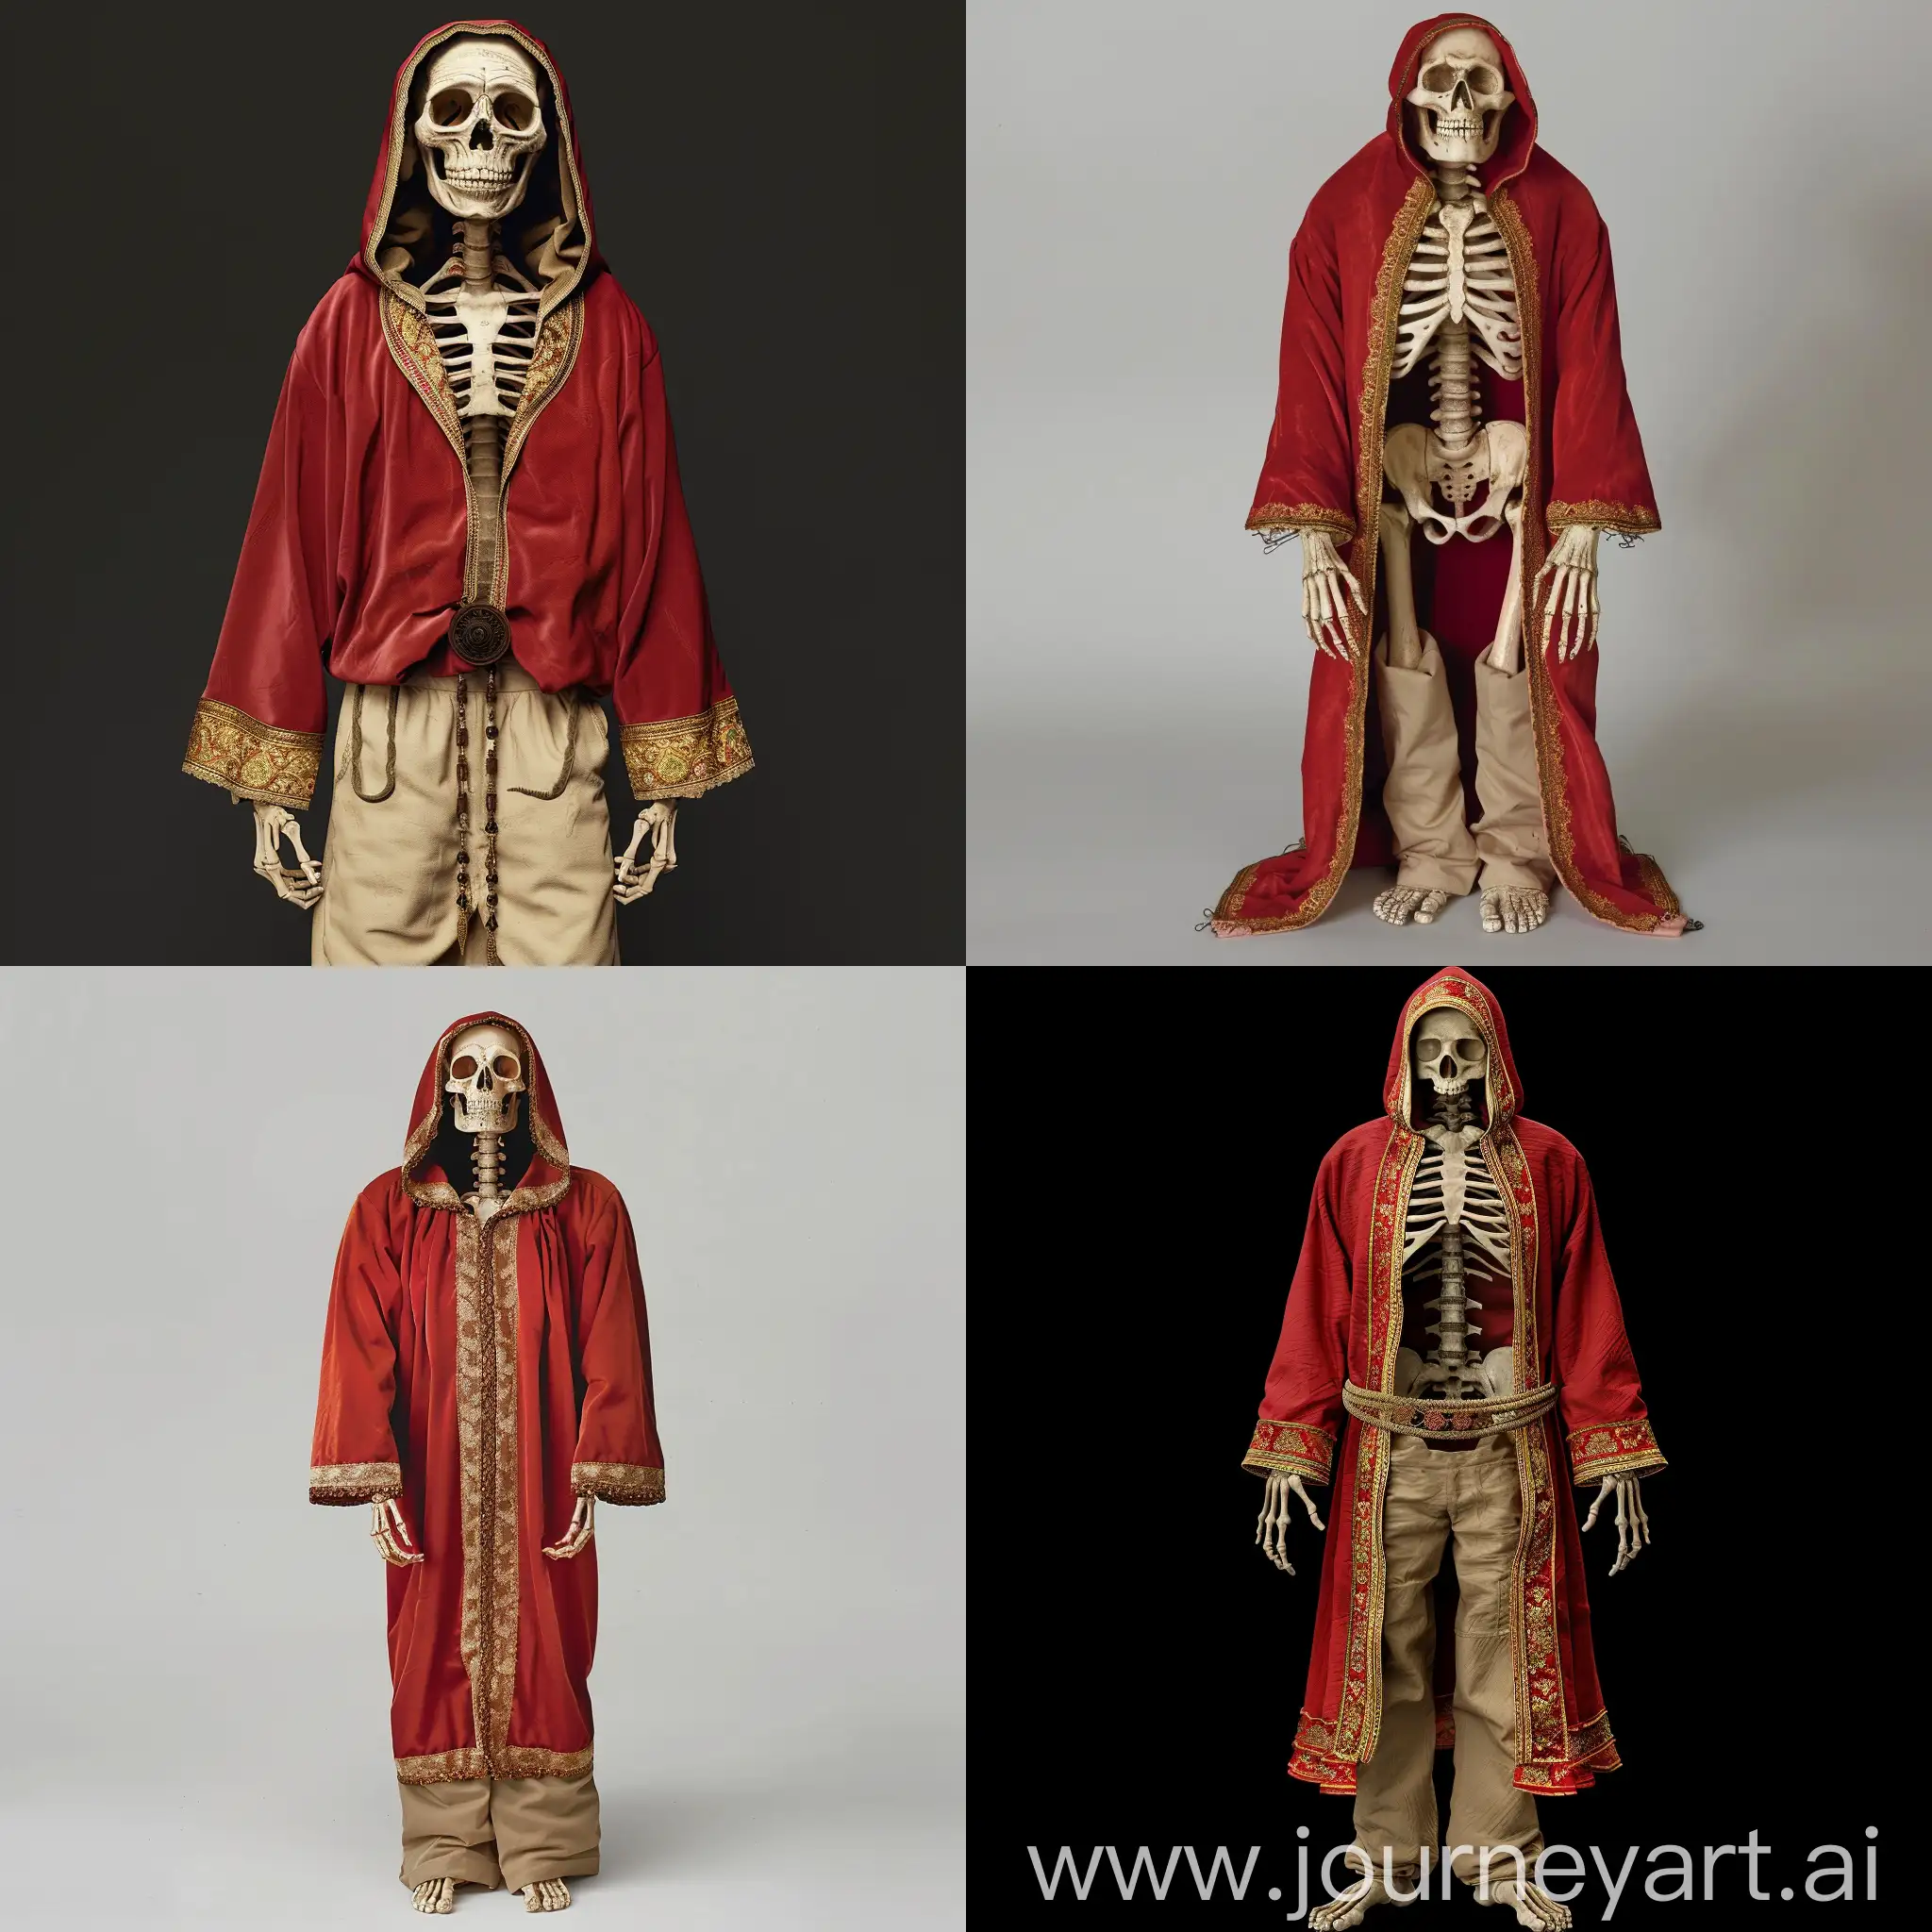 Mystical-Skeleton-in-Ornate-Red-Robe-with-Gold-Border